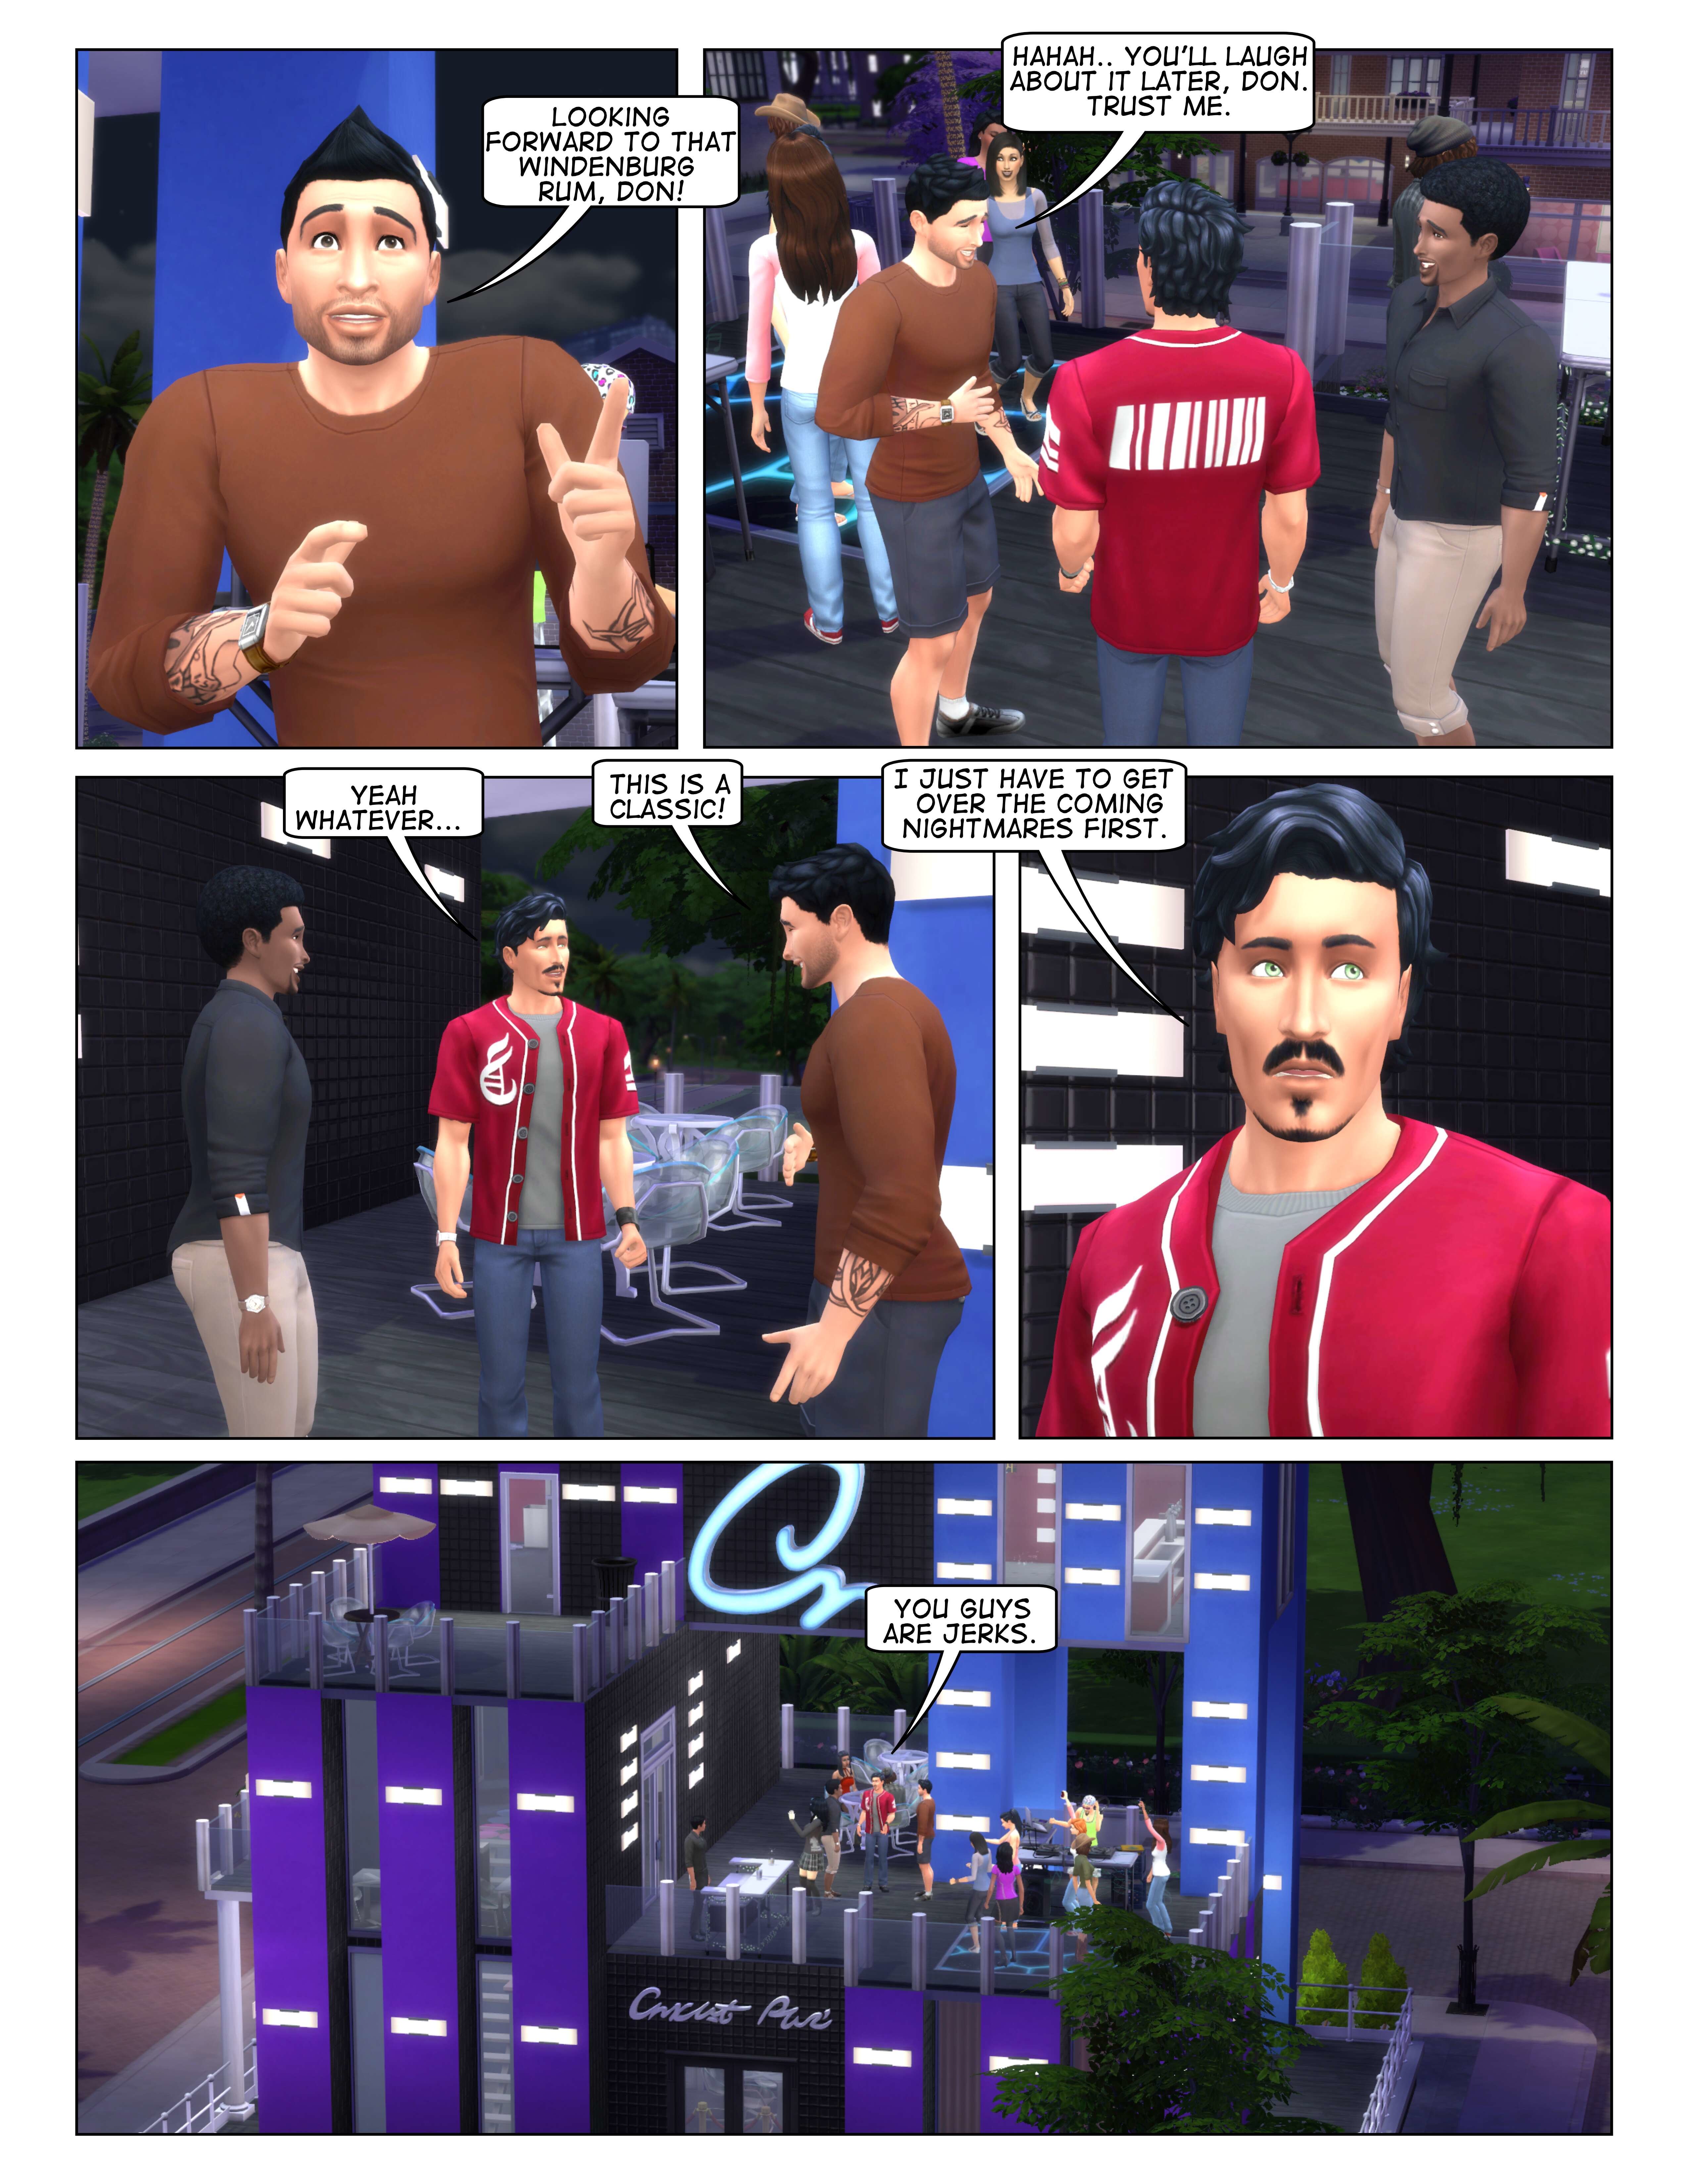 The Sims 4 Post Your Adult Goodies Screens Vids Etc Page 103